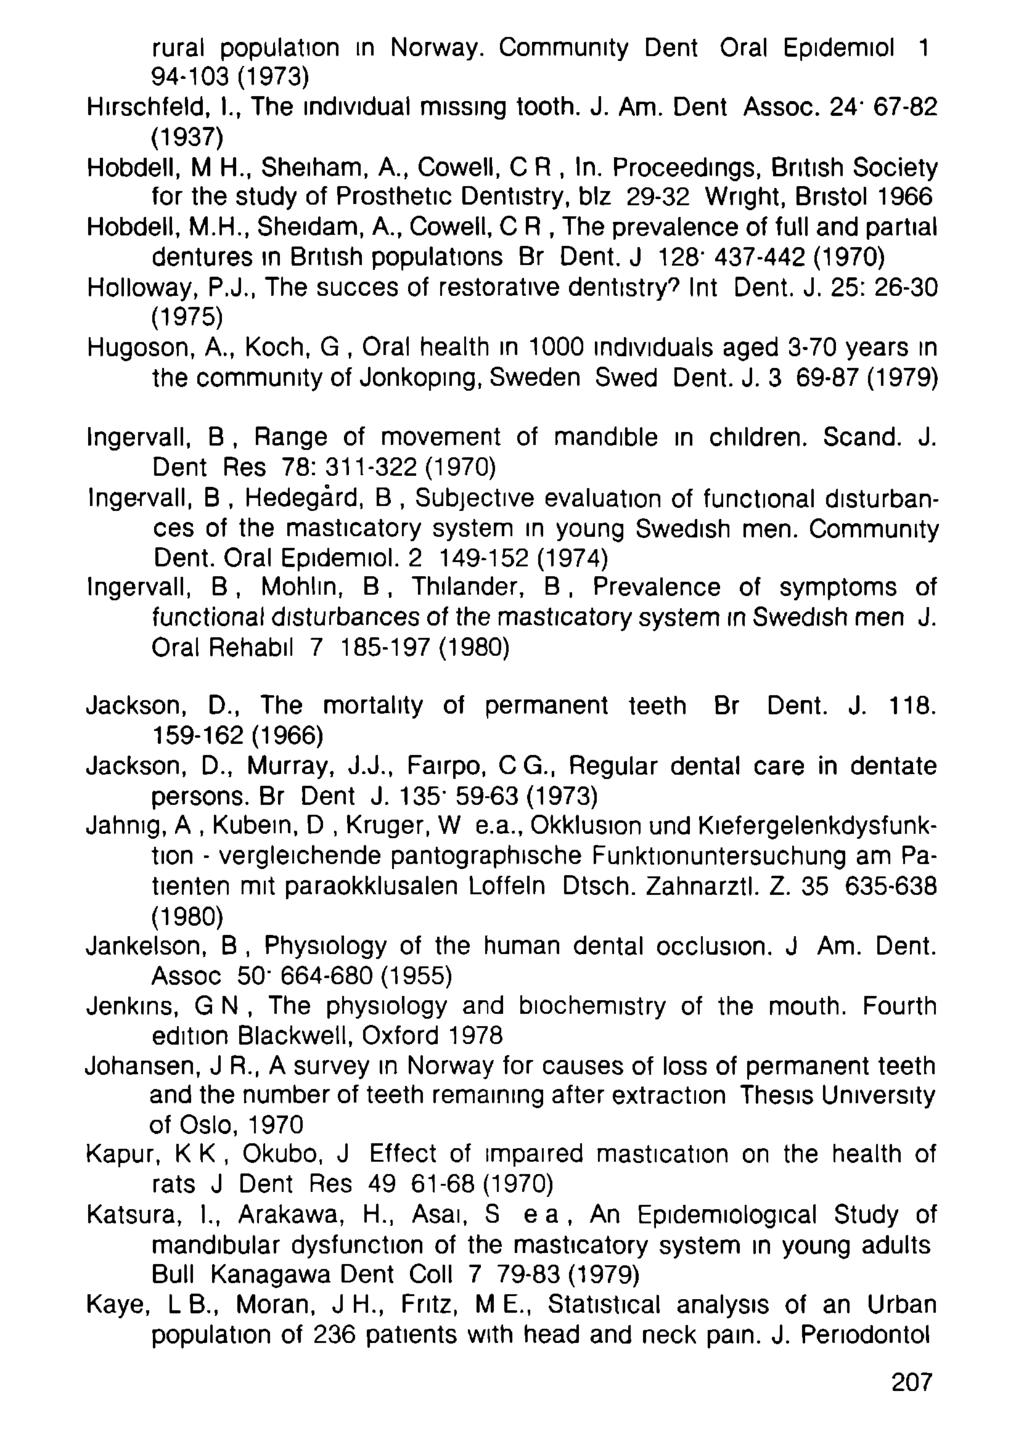 rural population m Norway. Community Dent Oral Epidemiol 1 94-13(1973) Hirschfeld, I., The individual missing tooth. J. Am. Dent Assoc. 24' 67-82 (1937) Hobdell, M H., Sheiham, Α., Cowell, С R, In.